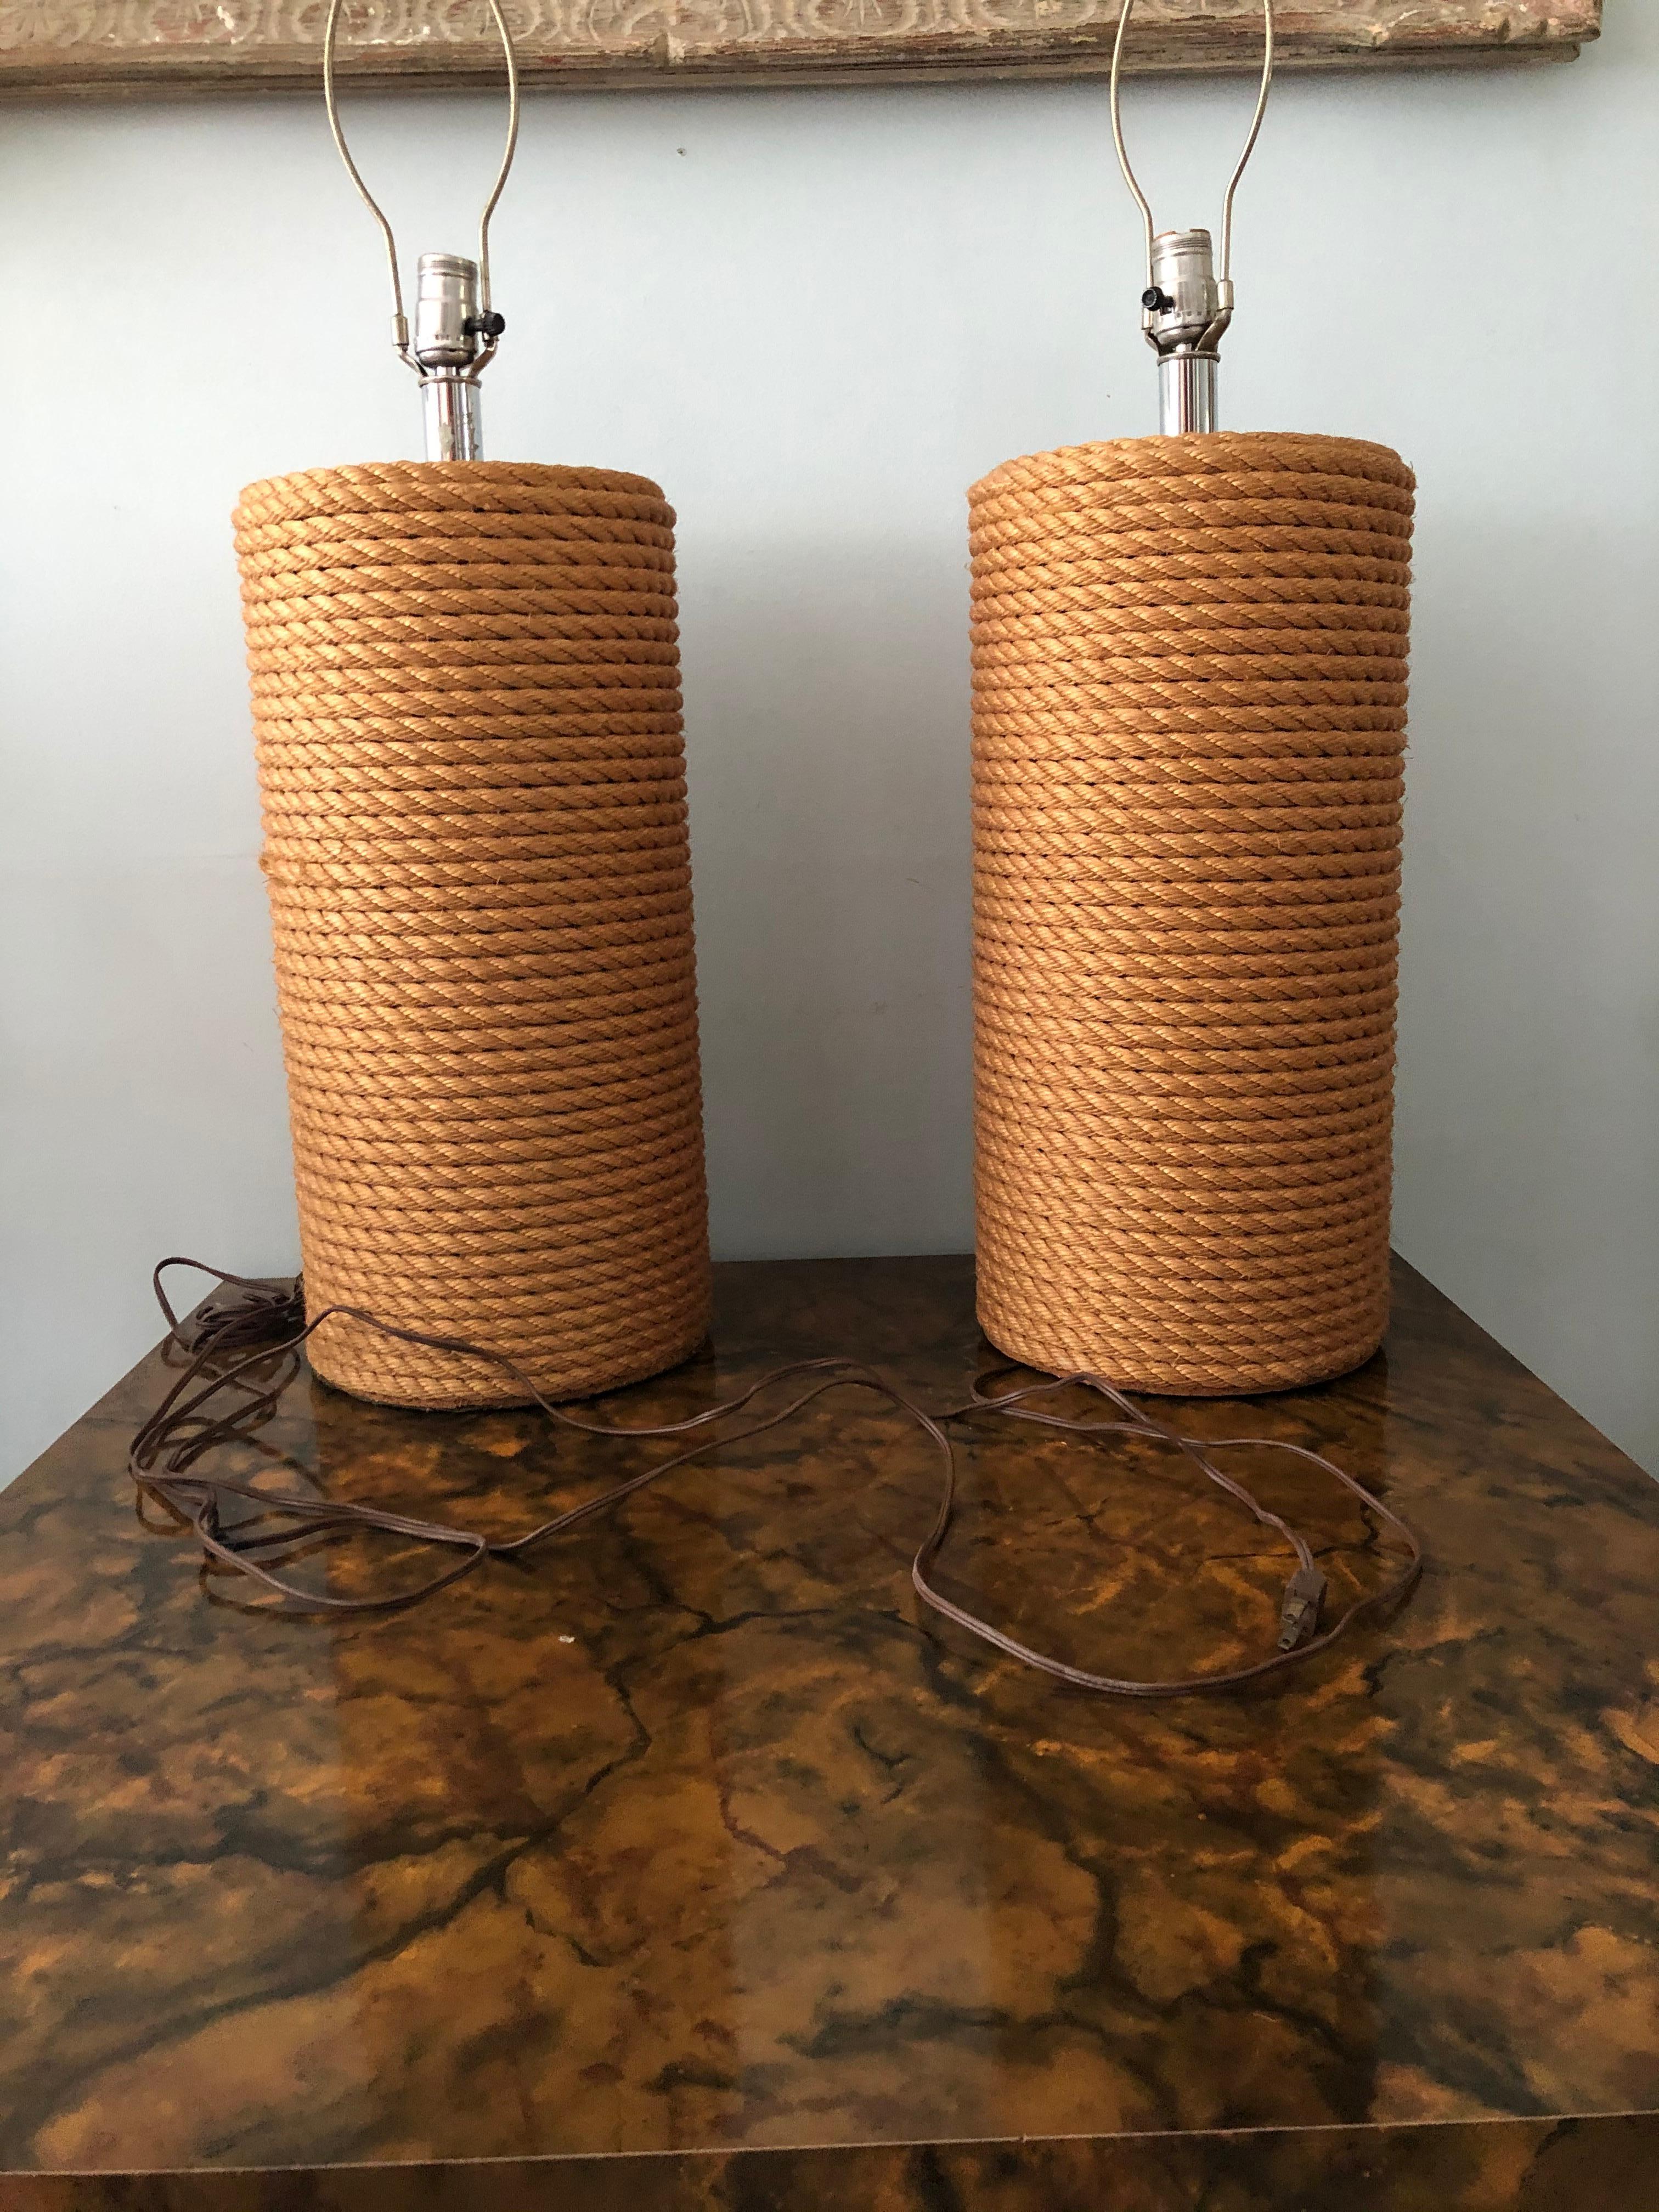 Fantastic pair of vintage rope lamps. Probably from the 1960s or 1970s. The lamps measure 20 inches high to the top of rope, and 32 1/2 inches to top of finial. They are 9 1/2 inches wide and deep.